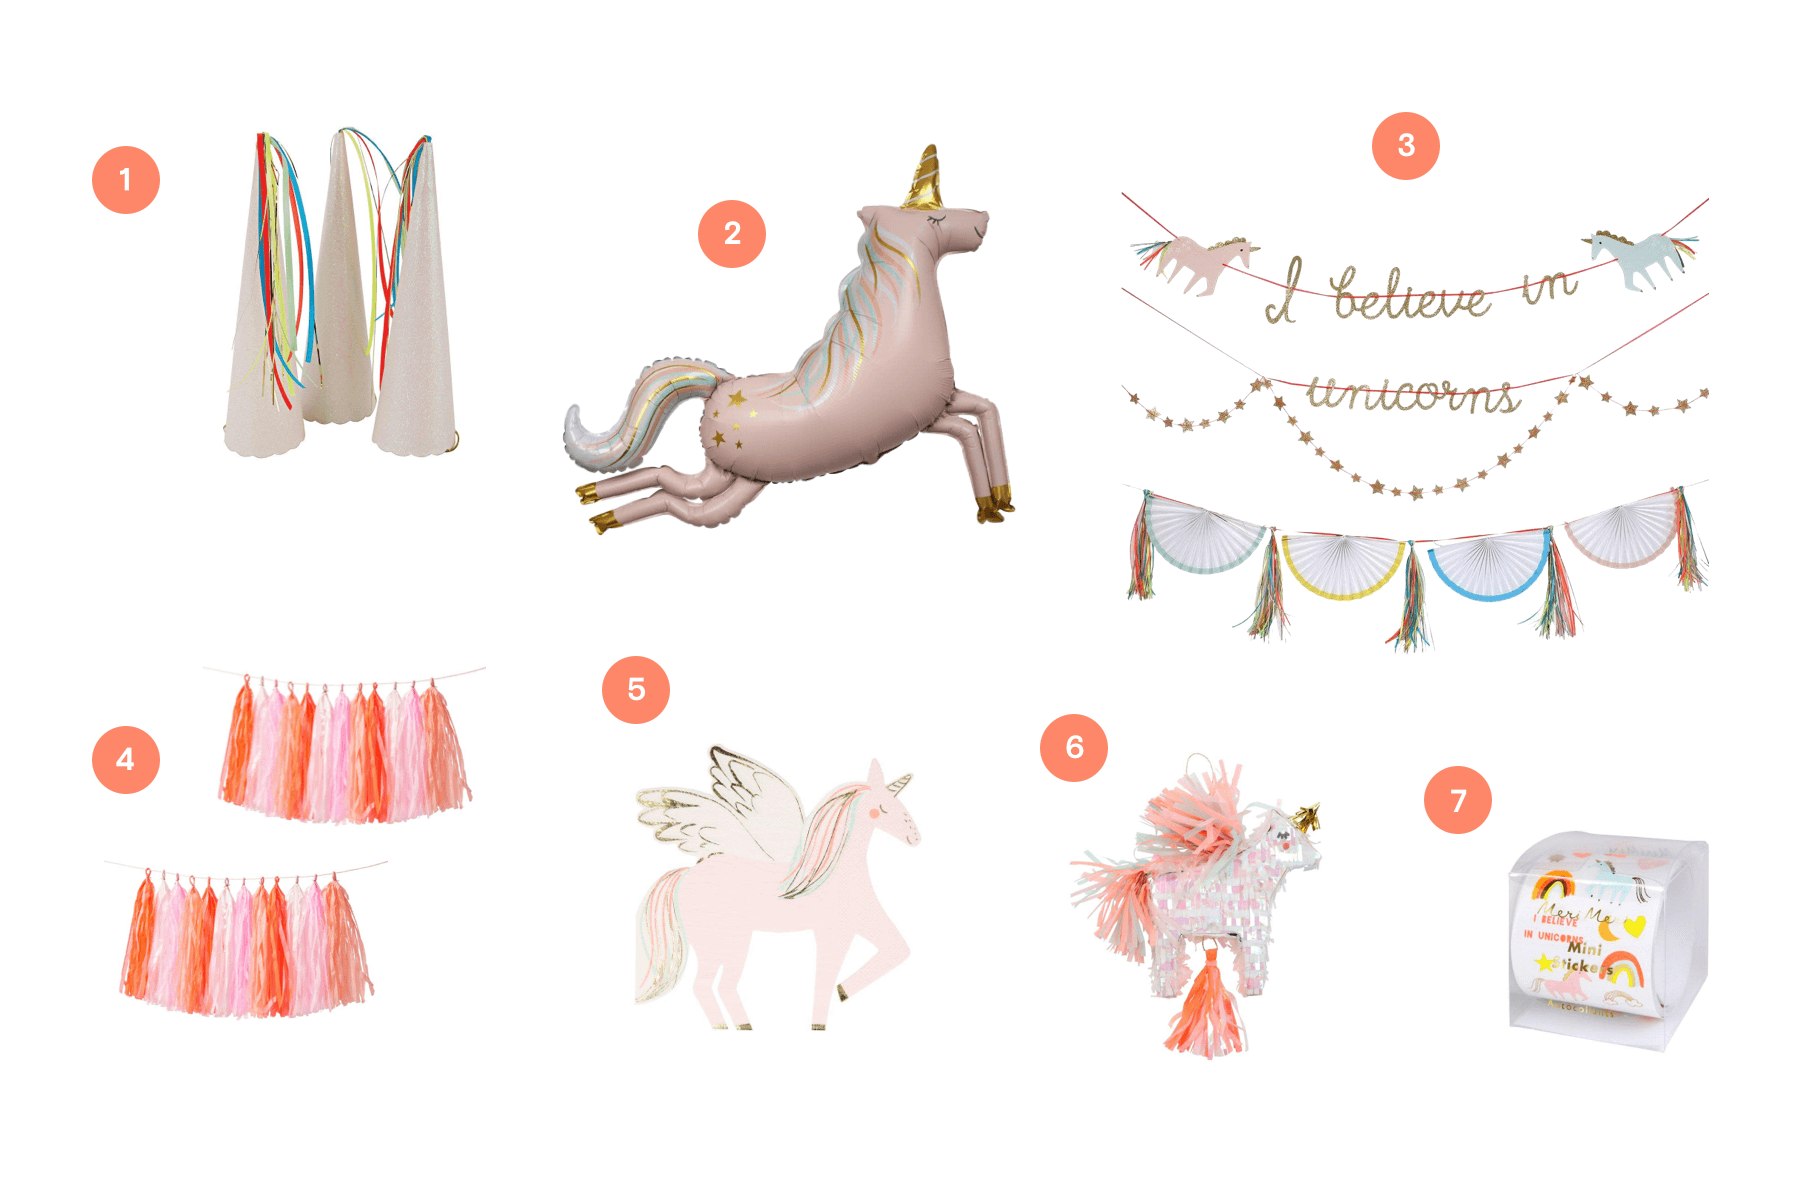 Unicorn-themed party supplies on a white background, including party hats, decor, and temporary tattoos.